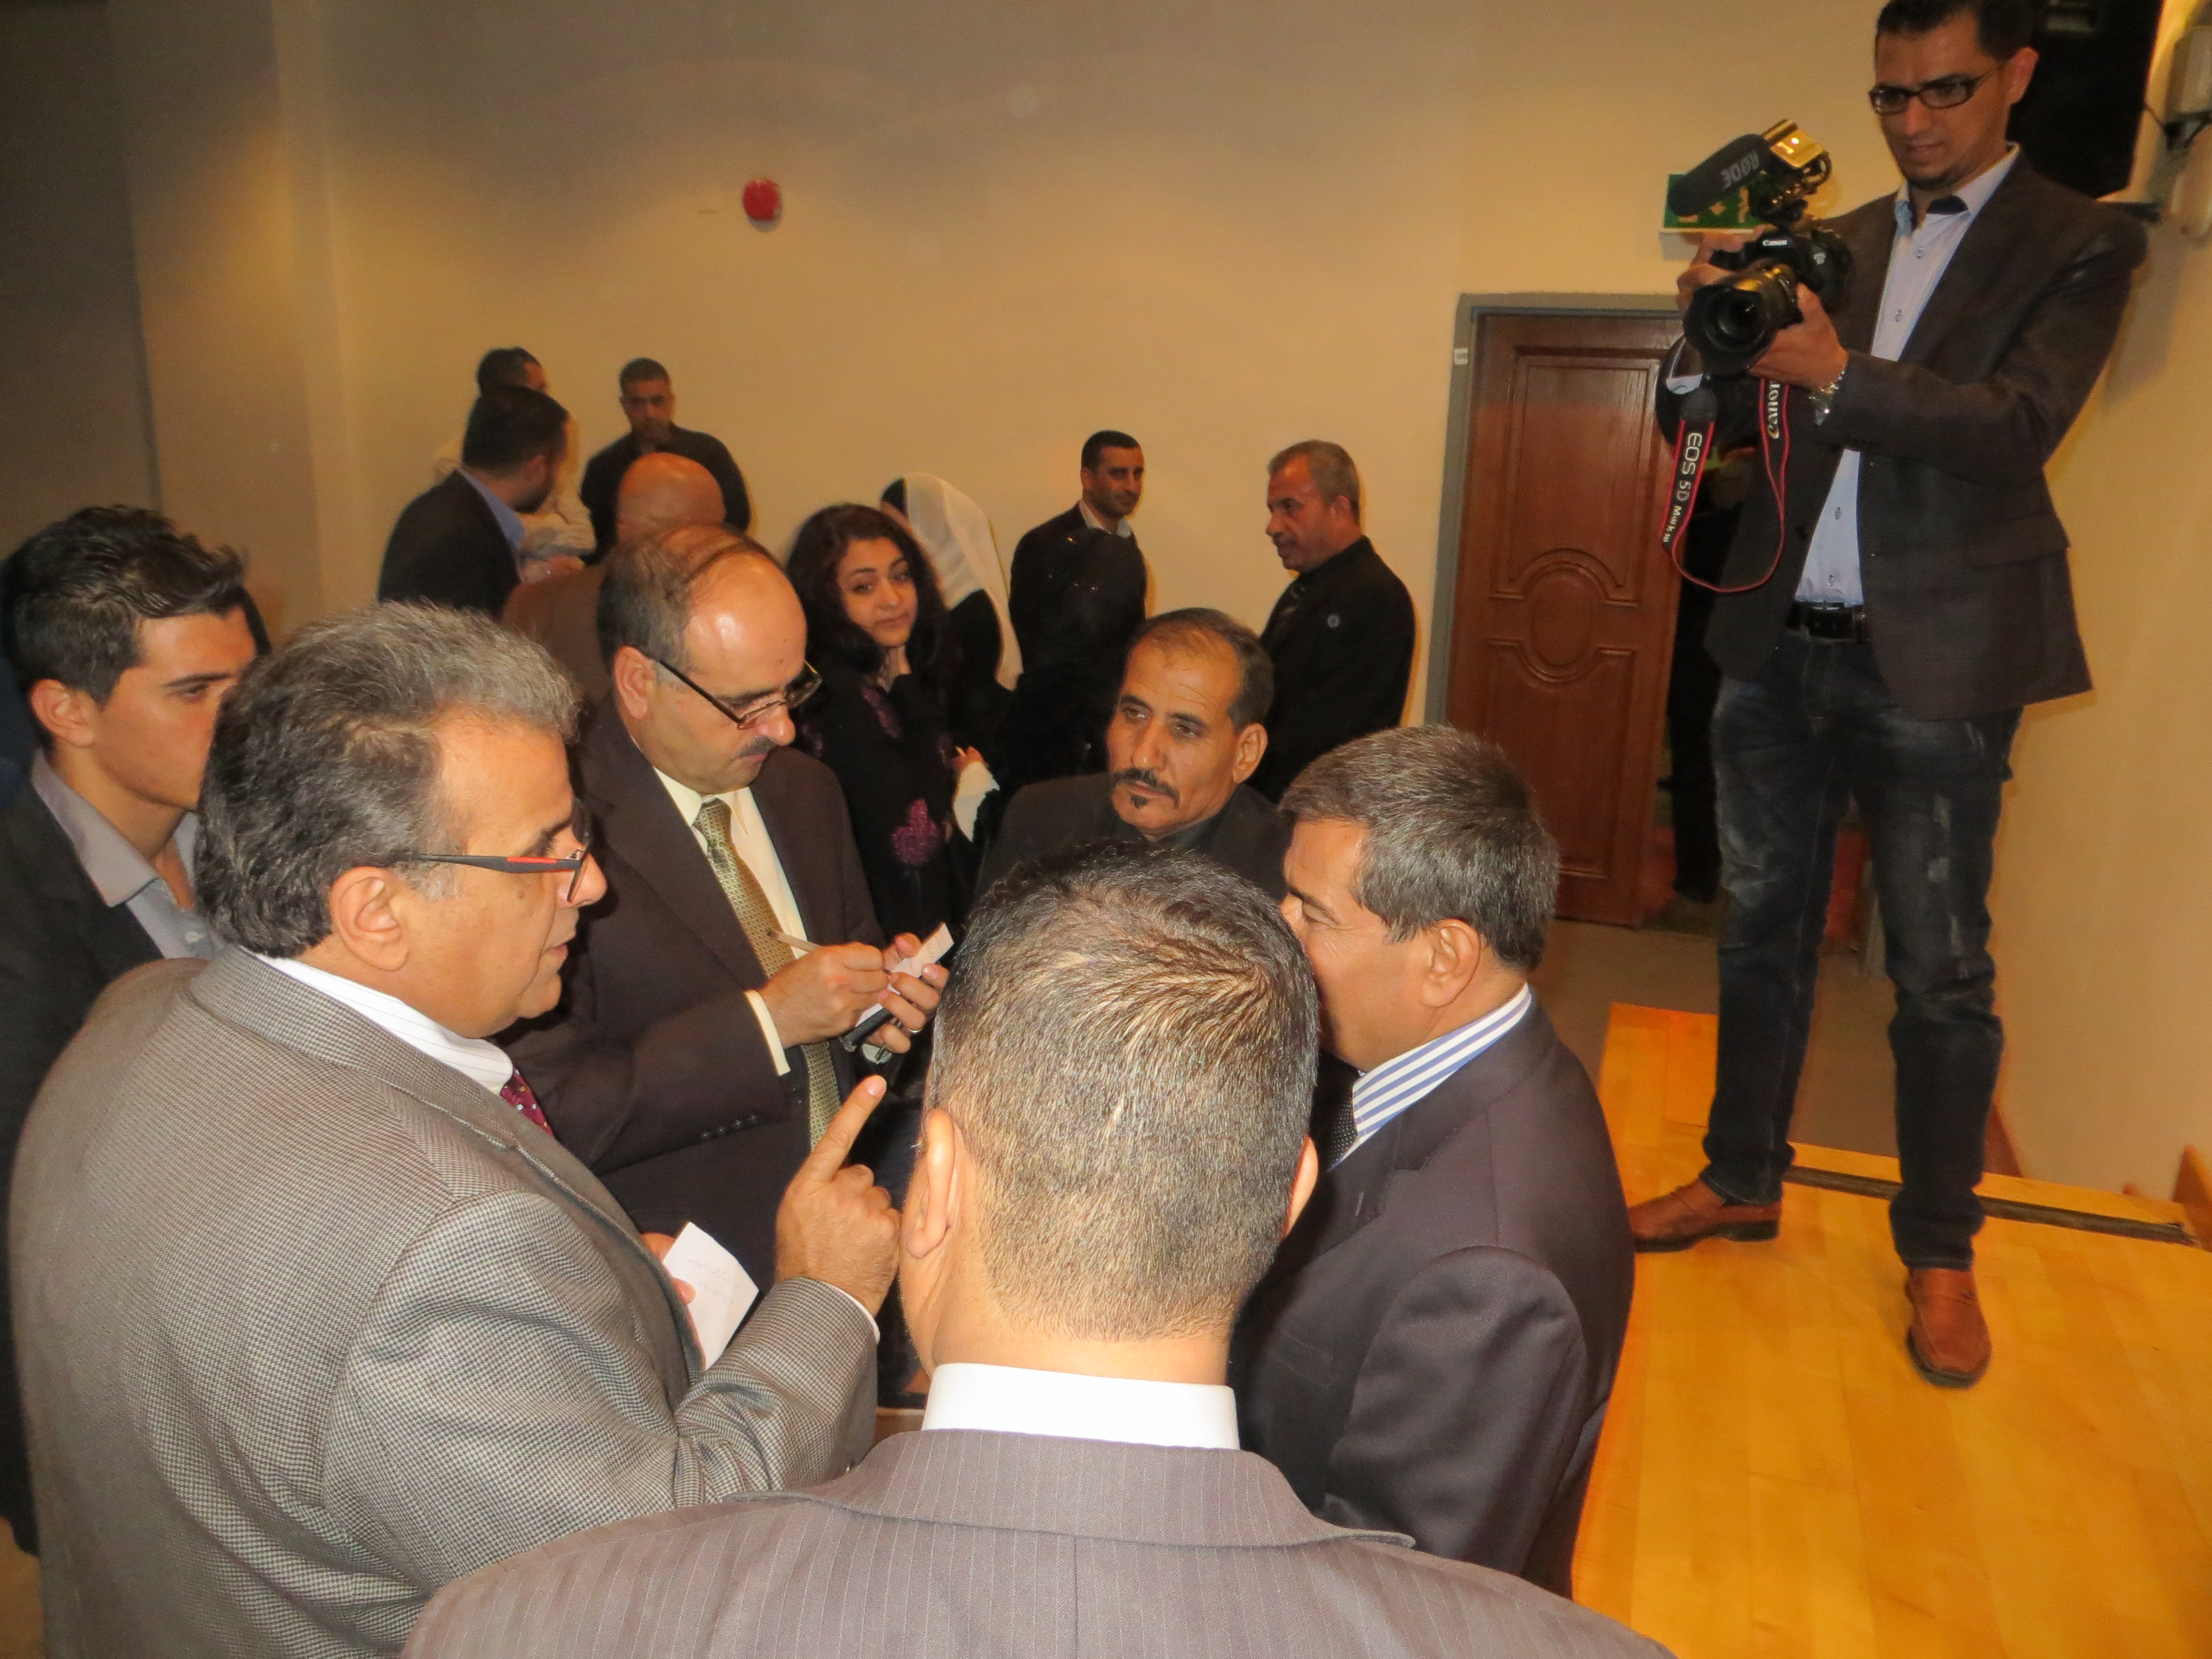 Director George Nemeh chatting away with many Jordanain dignatories our US counter part